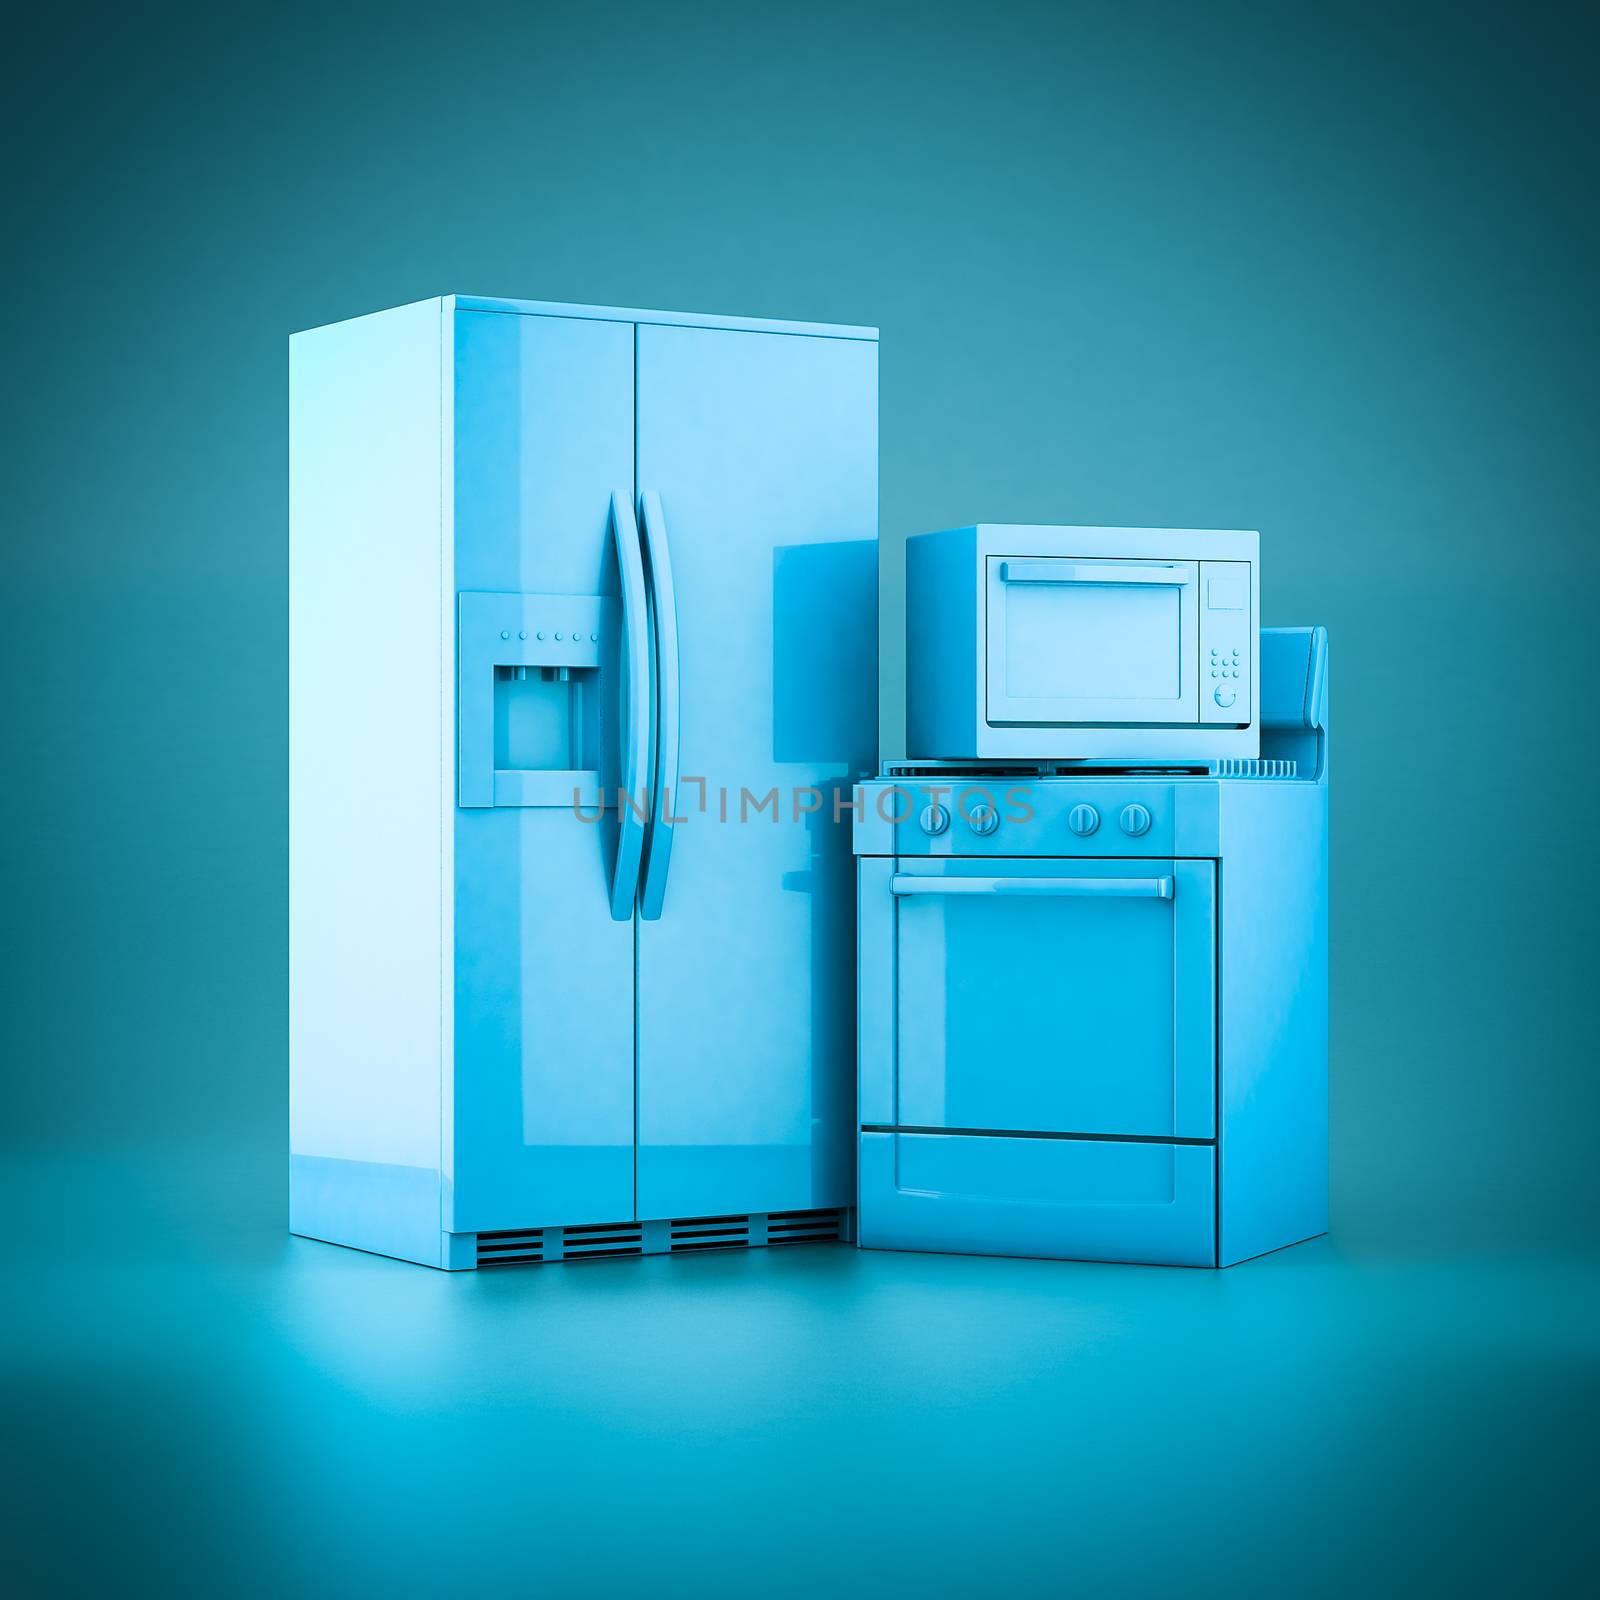 picture of household appliances on a blue background